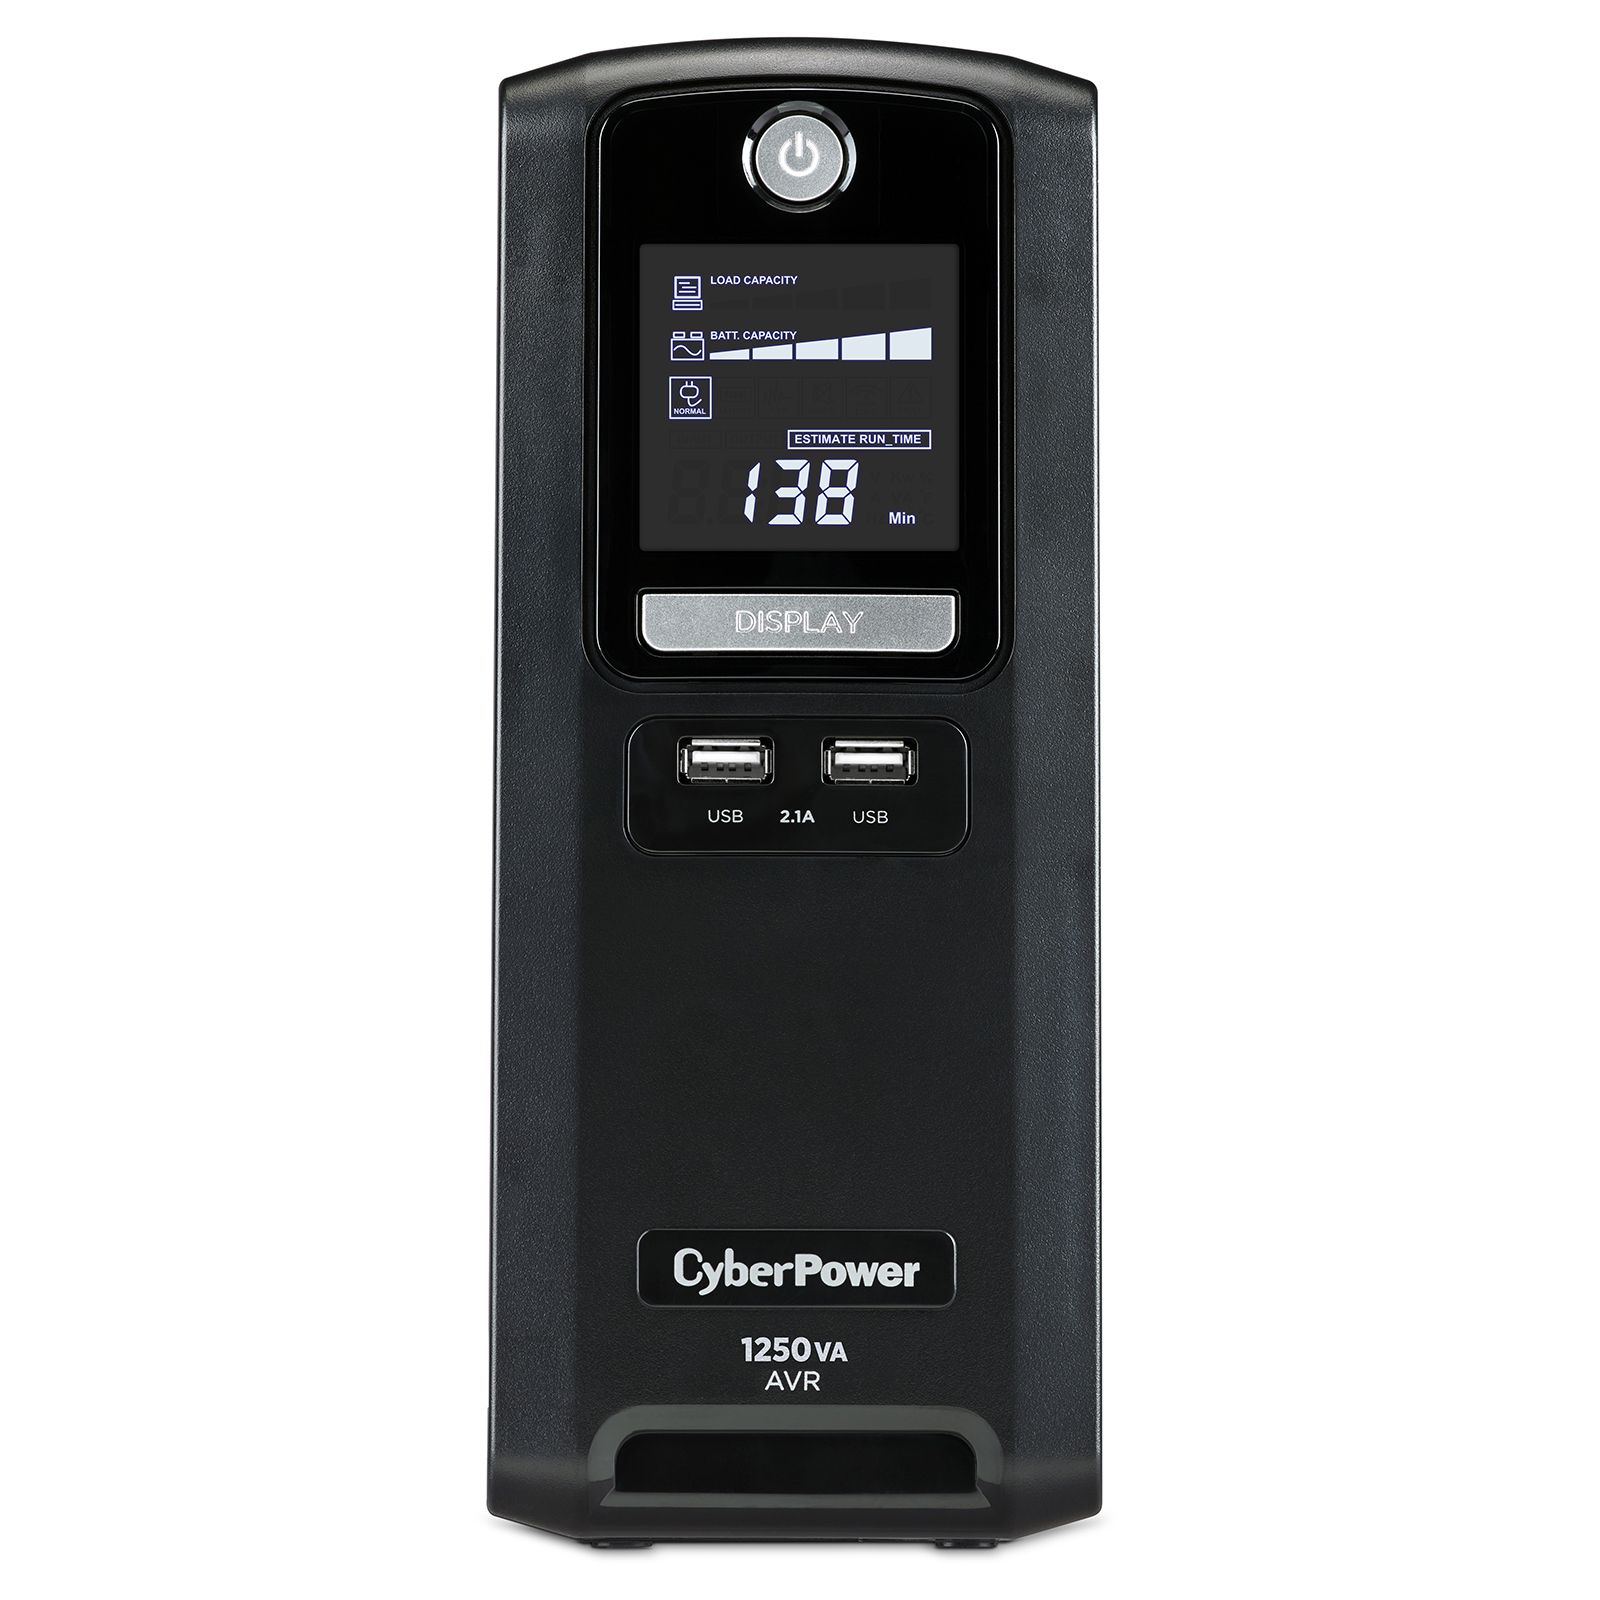 CyberPower BL1250U Uninterruptible Power Supply with Battery Backup